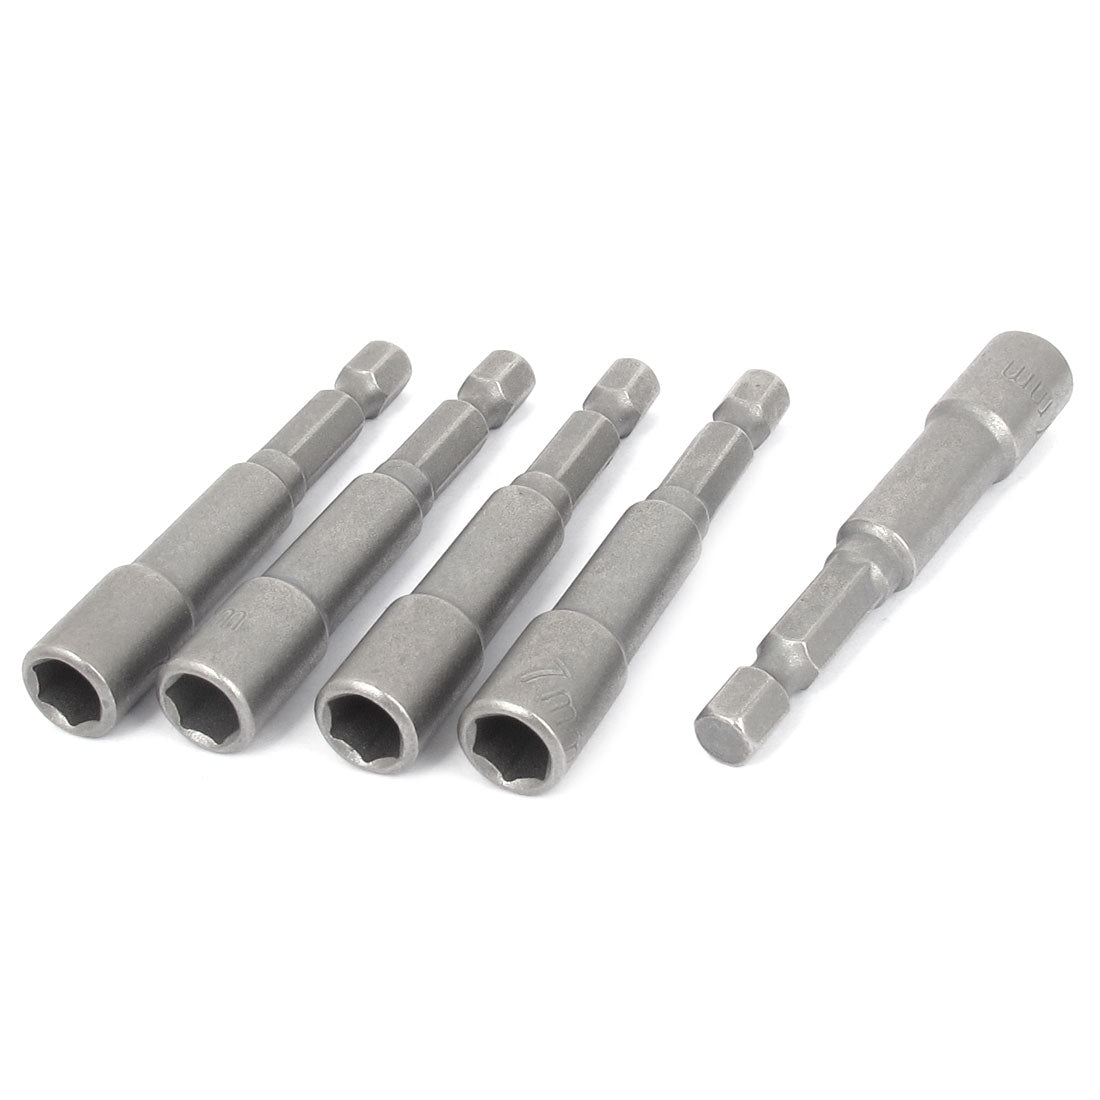 uxcell Uxcell 1/4" Shank 7mm Hex Socket Nut Setter Driver Bit Gray 5pcs Non-magnetic